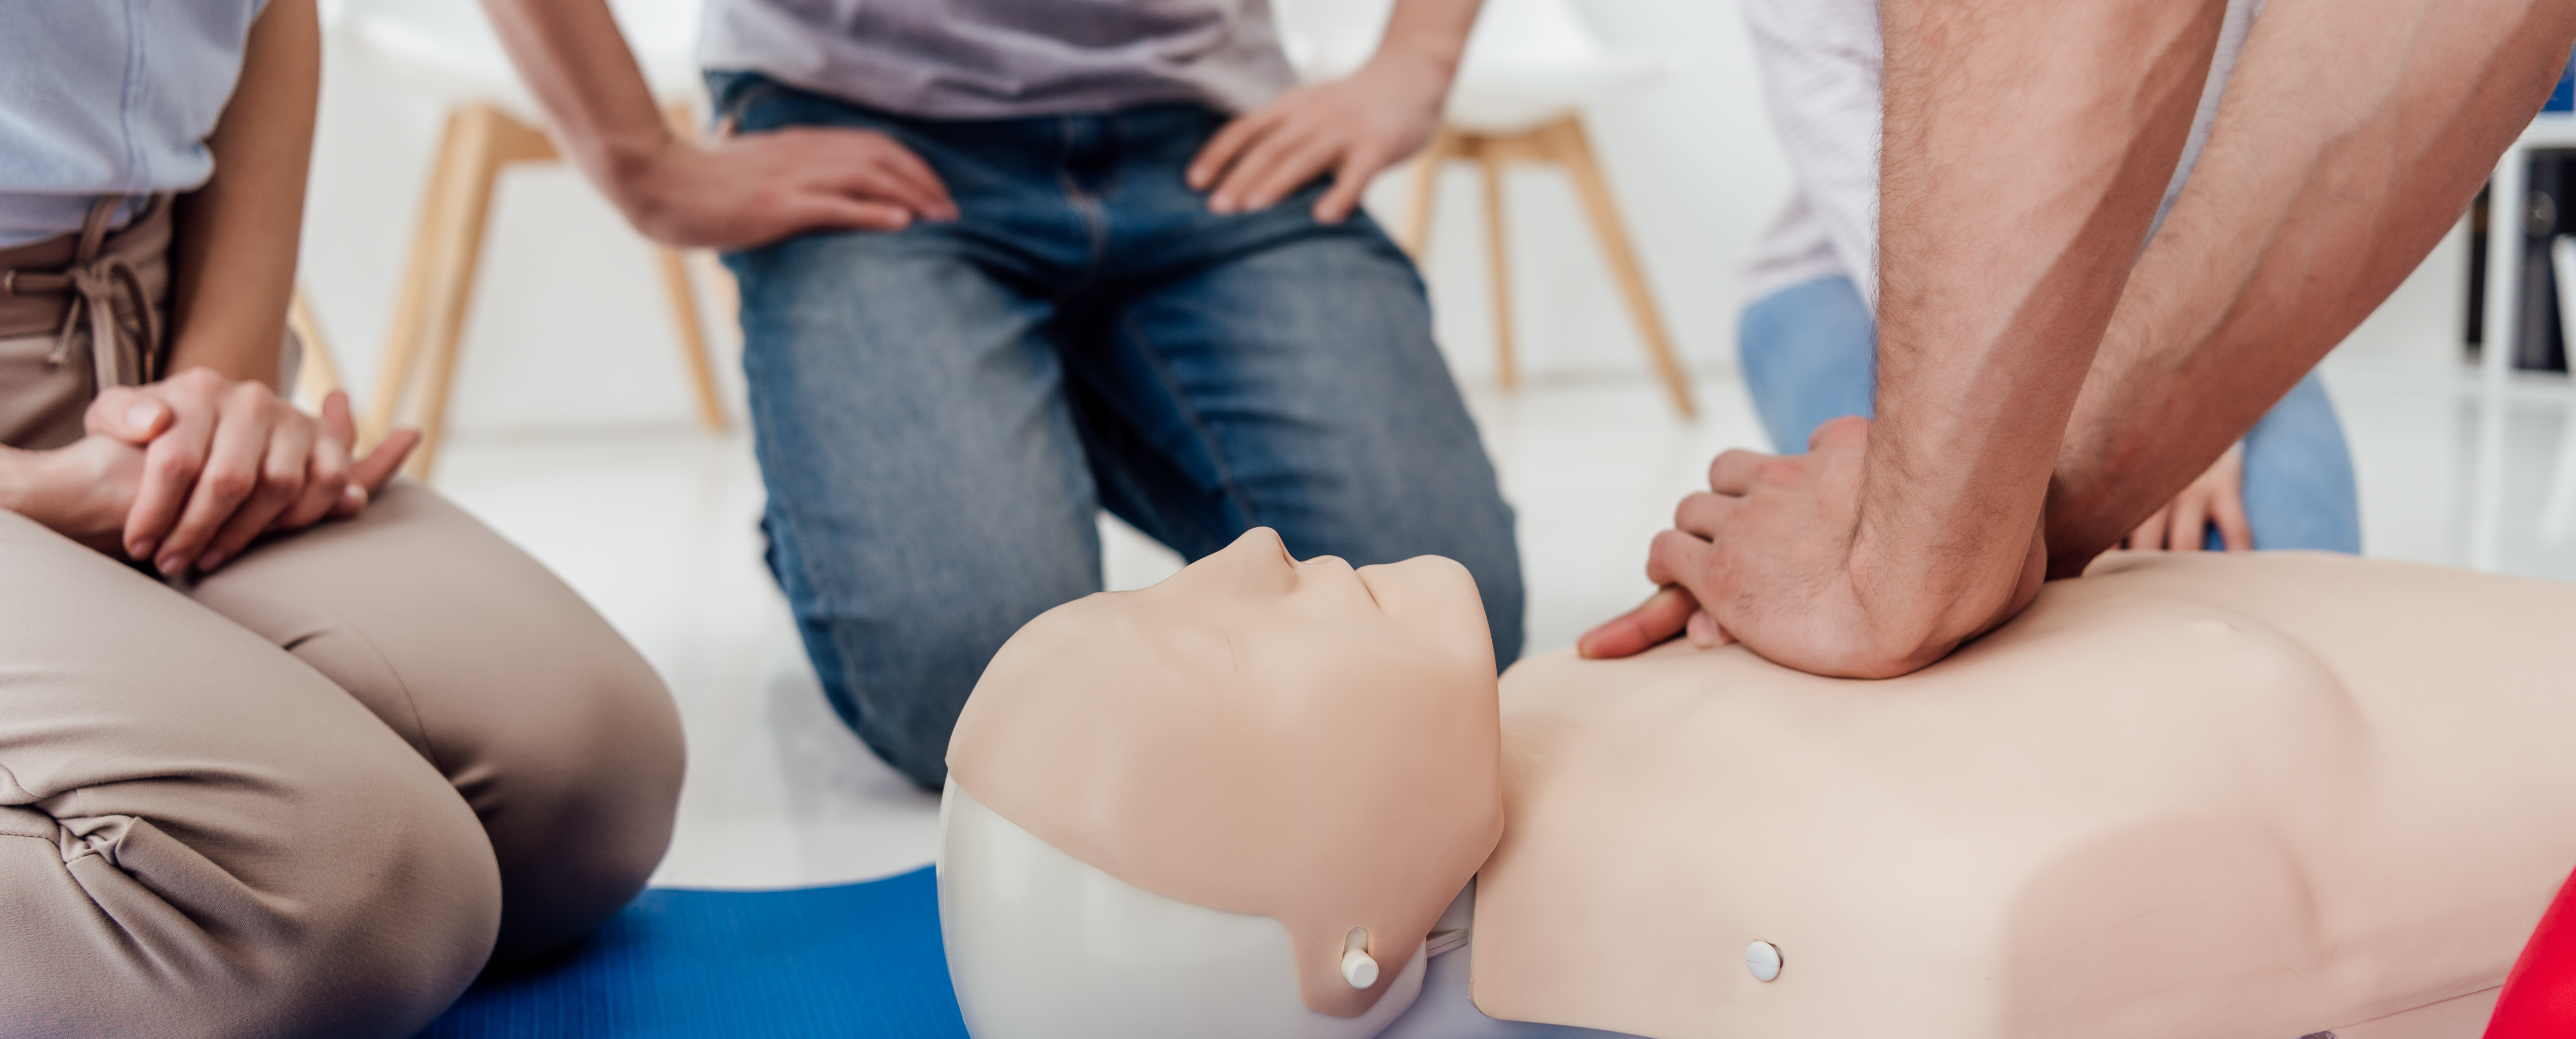 Instructor demonstrating CPR on a dummy